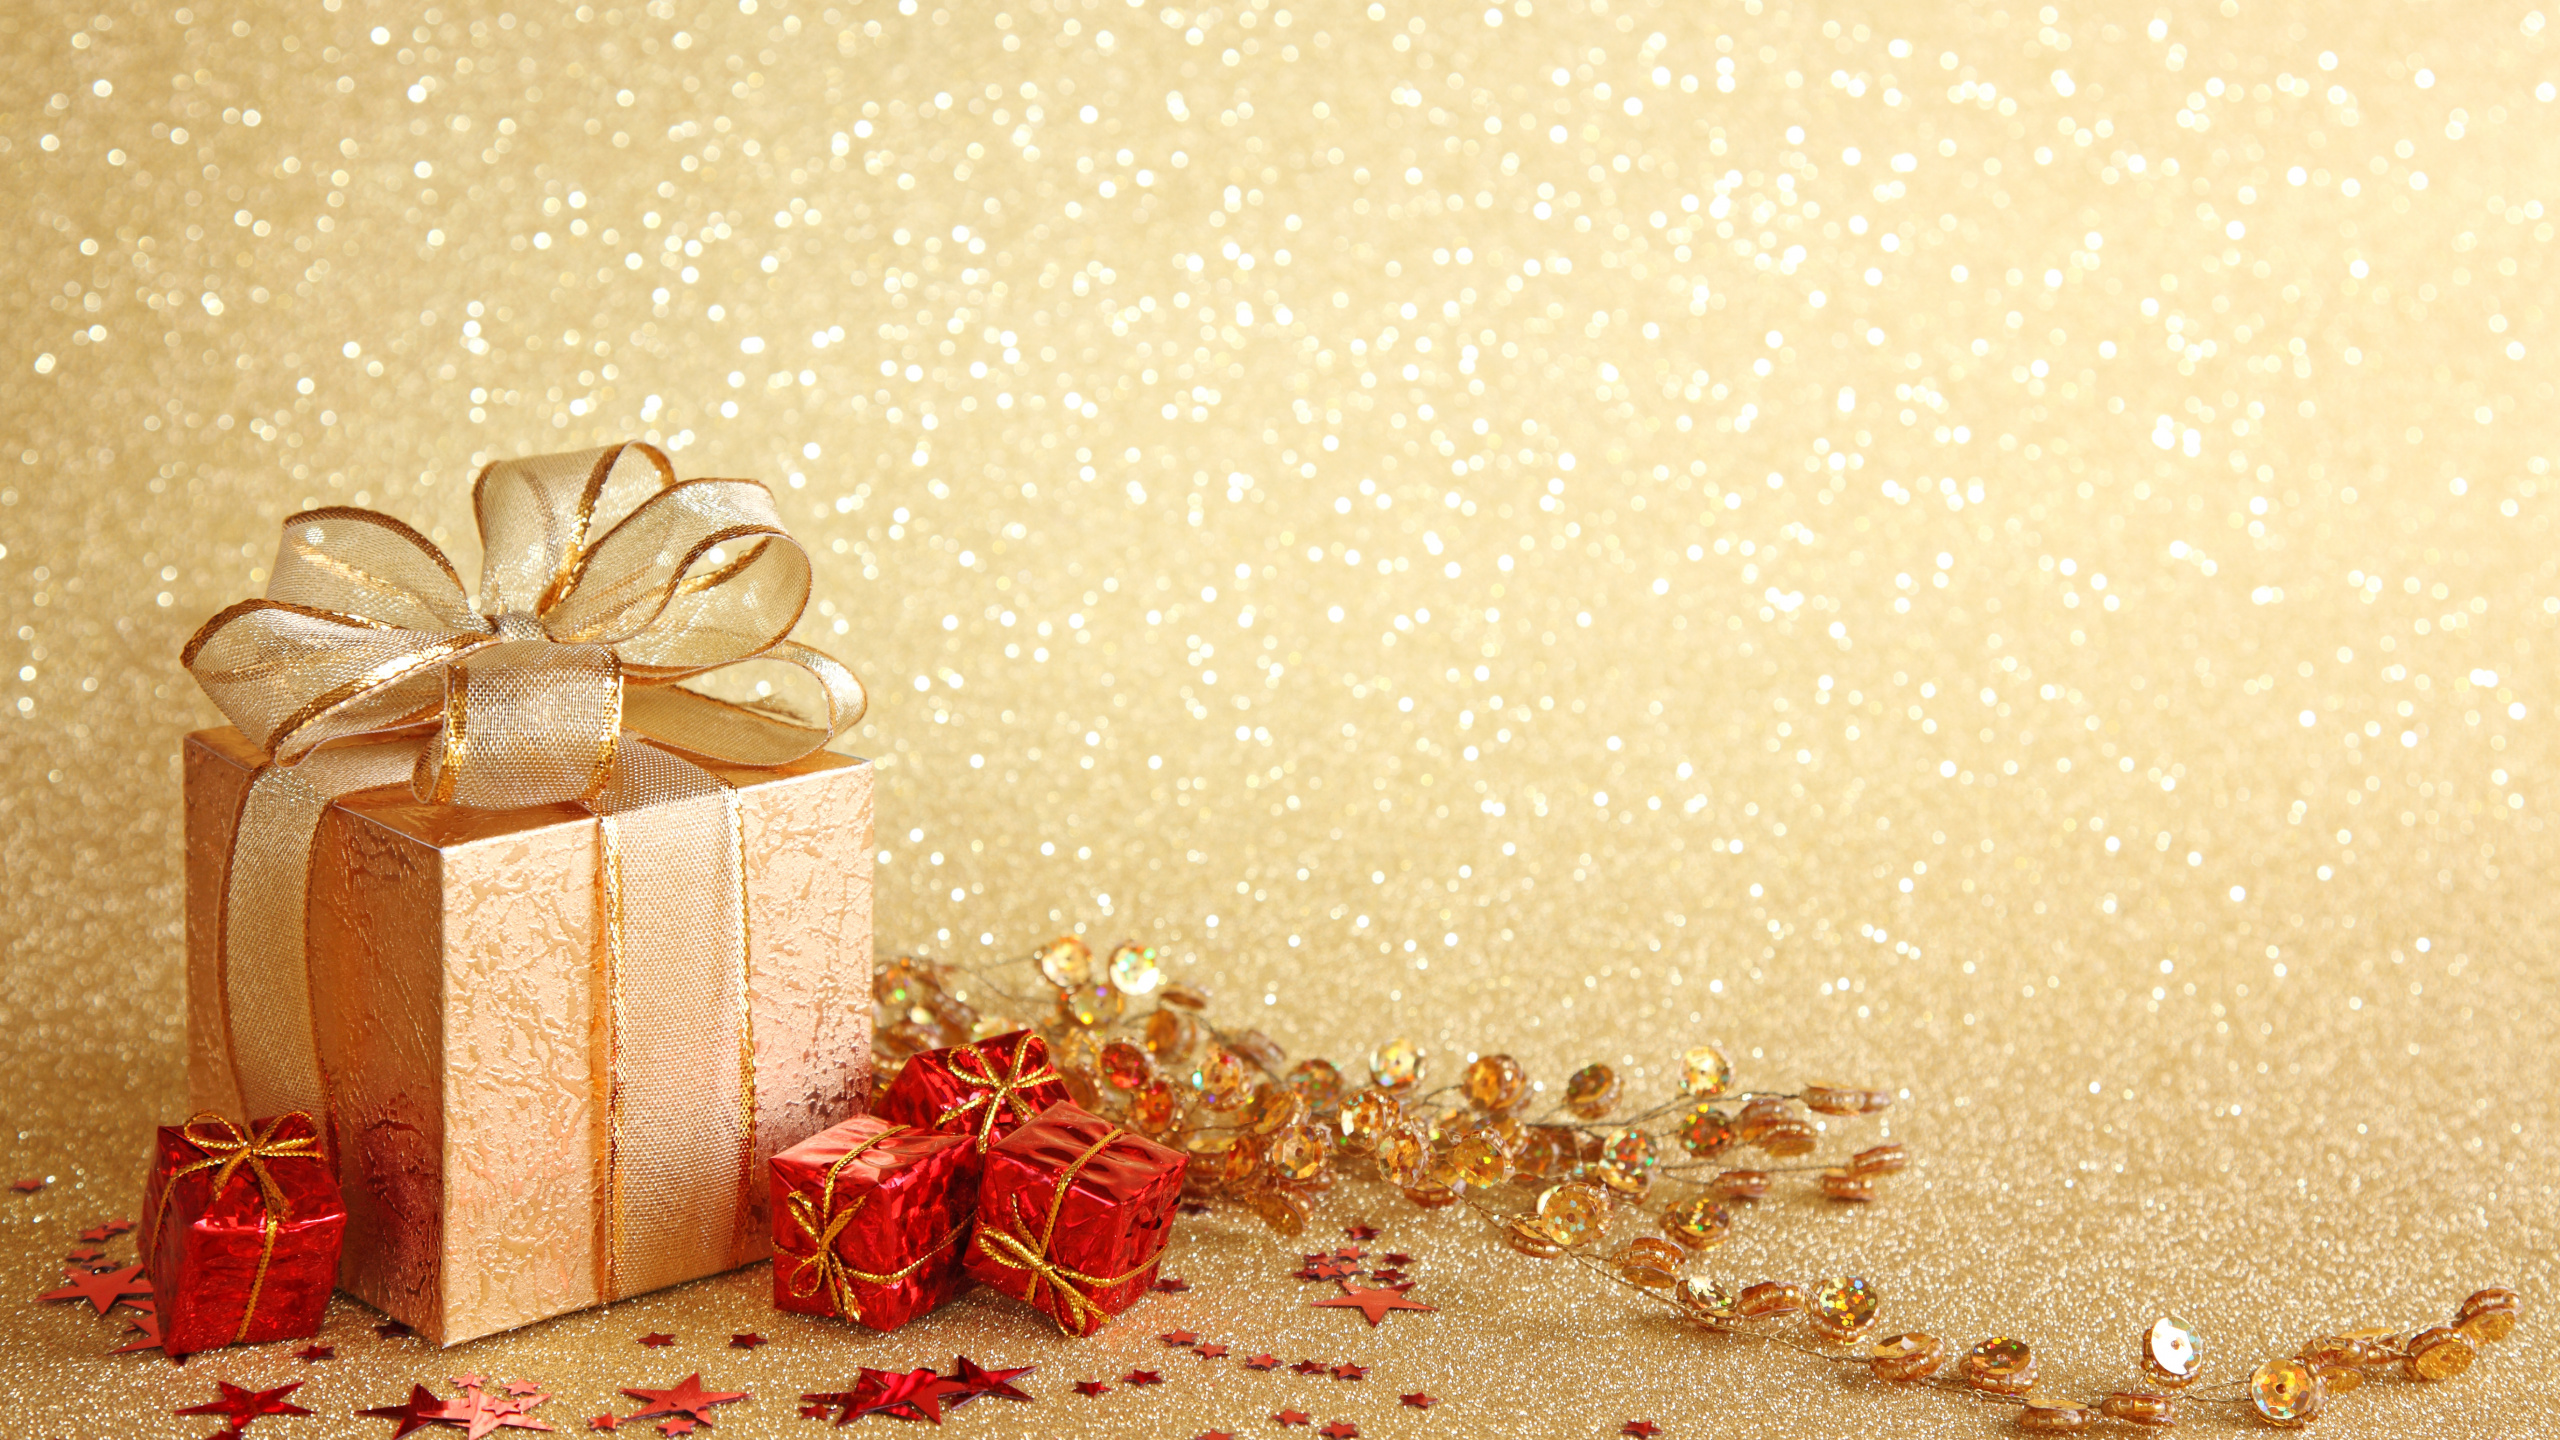 New Year, Happiness, Wish, Christmas Day, Present. Wallpaper in 2560x1440 Resolution